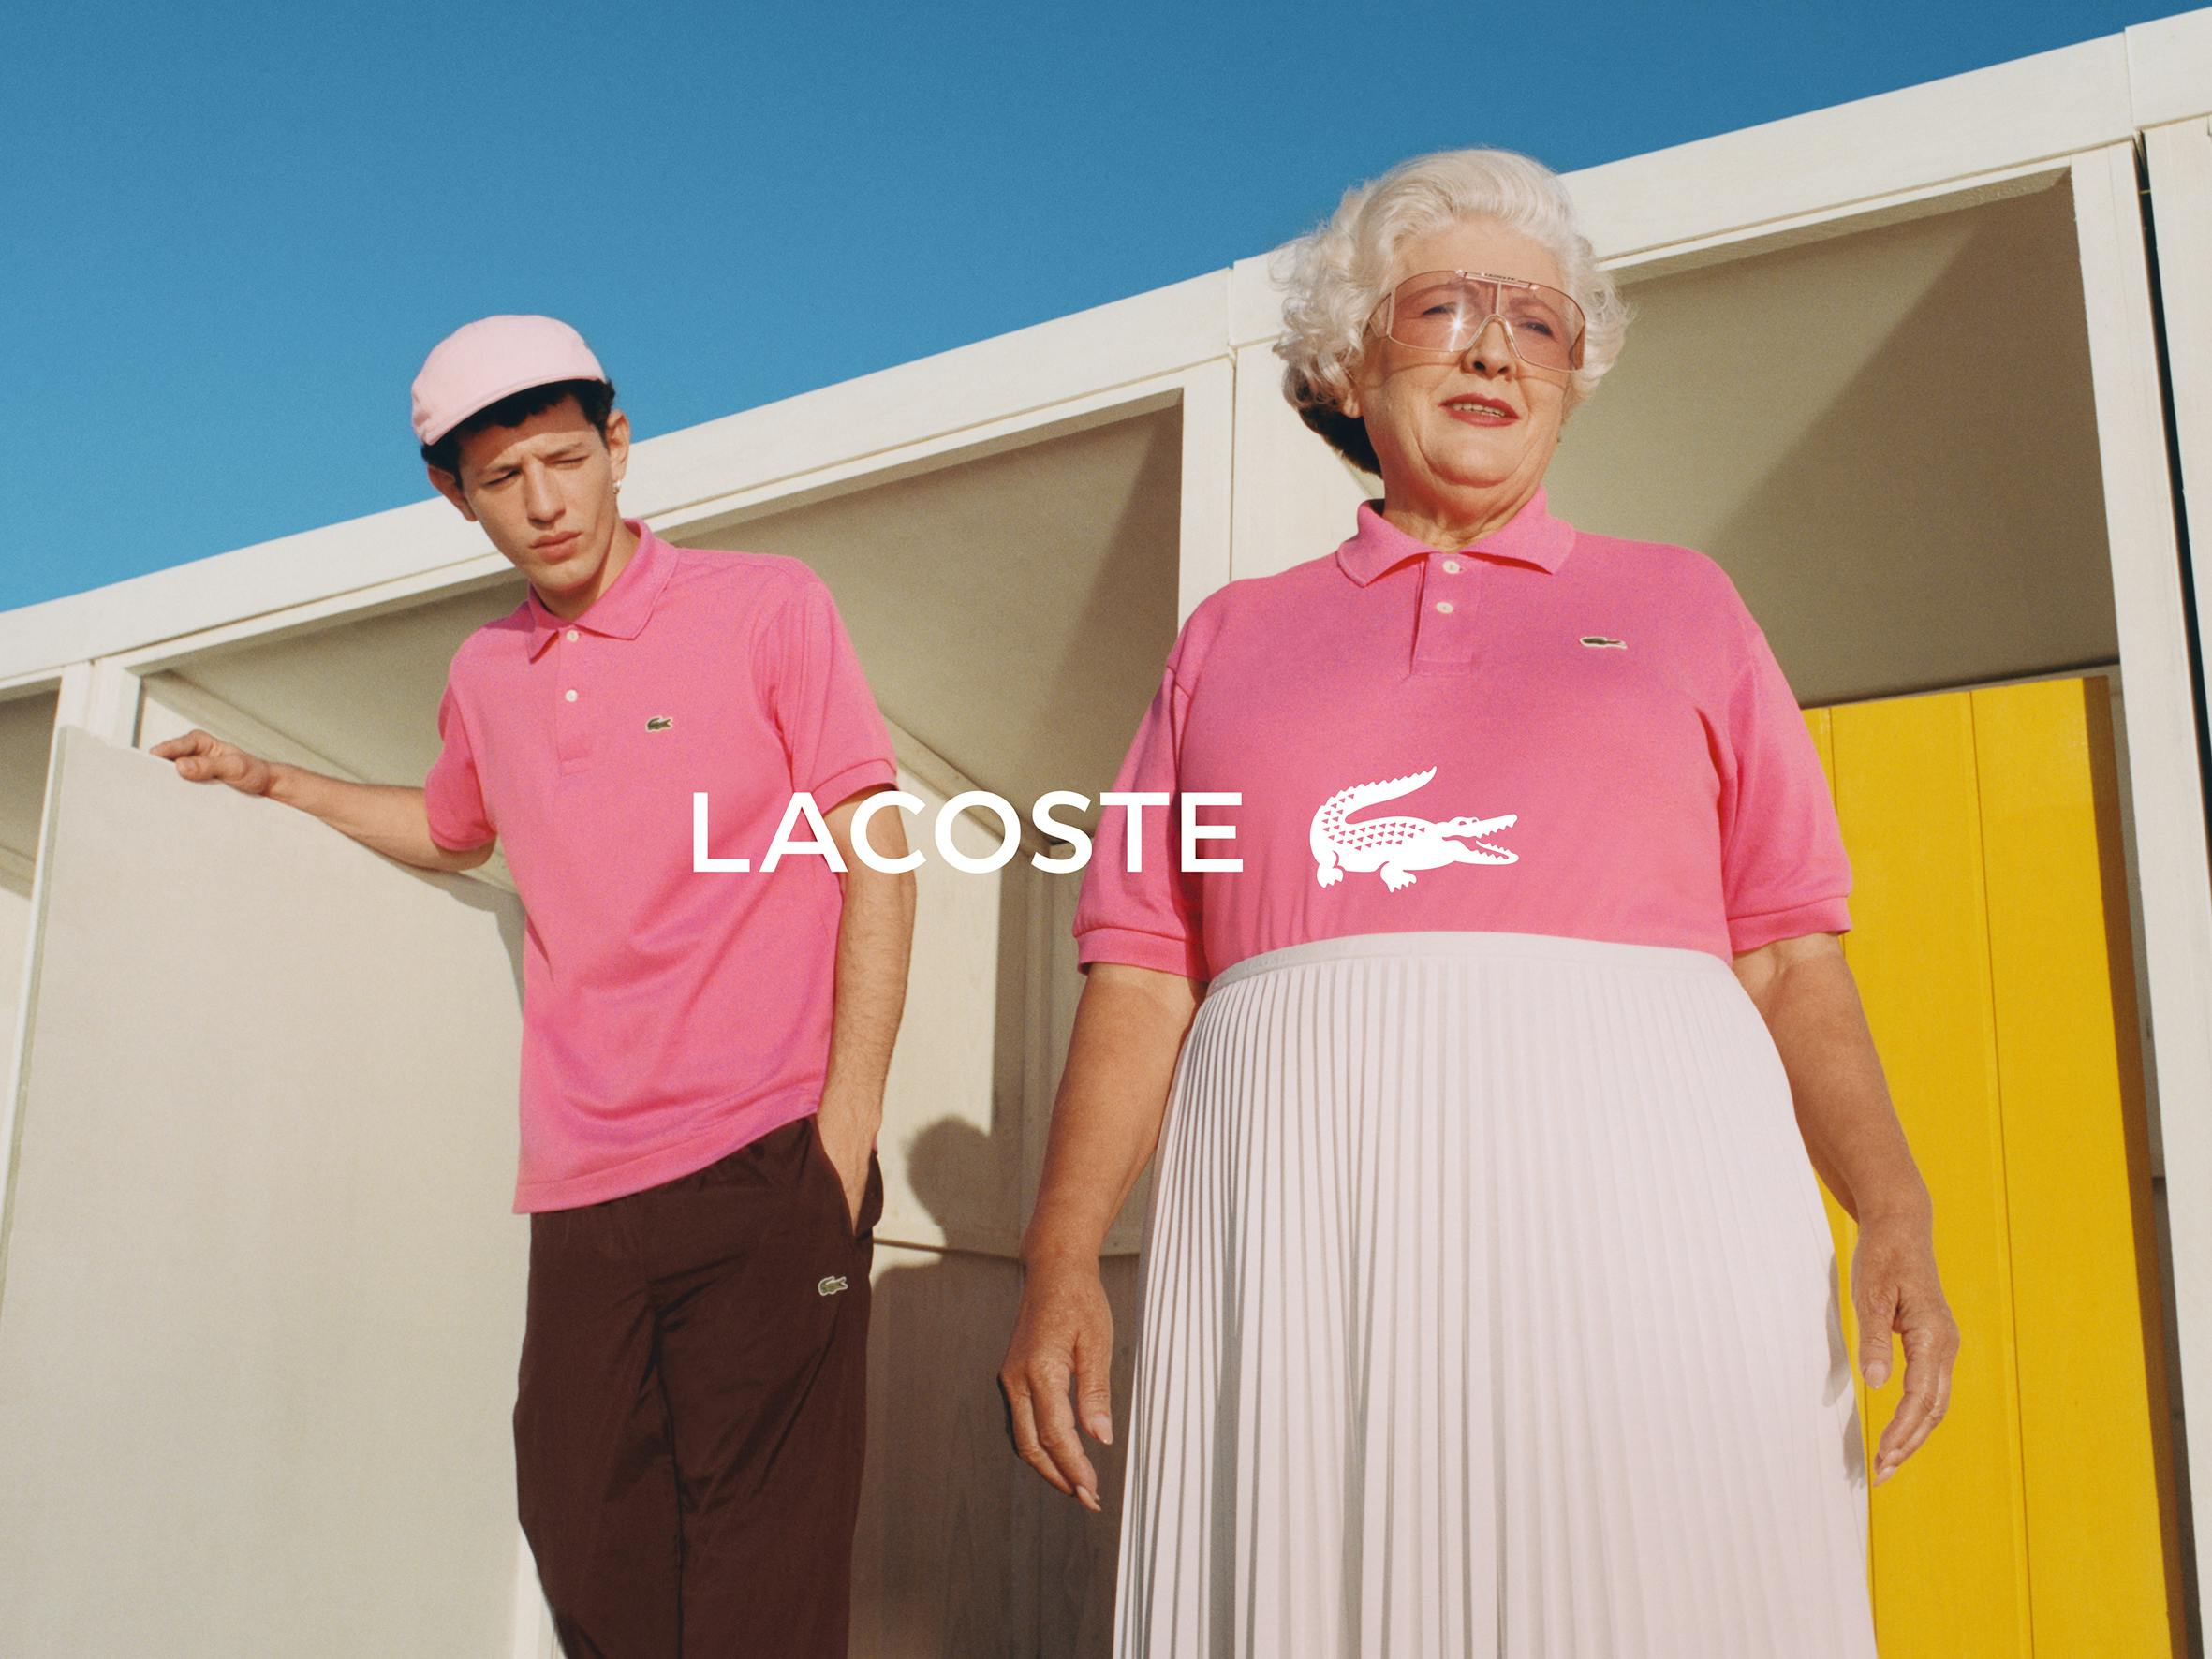 New campaign emphasises the brand's ageless